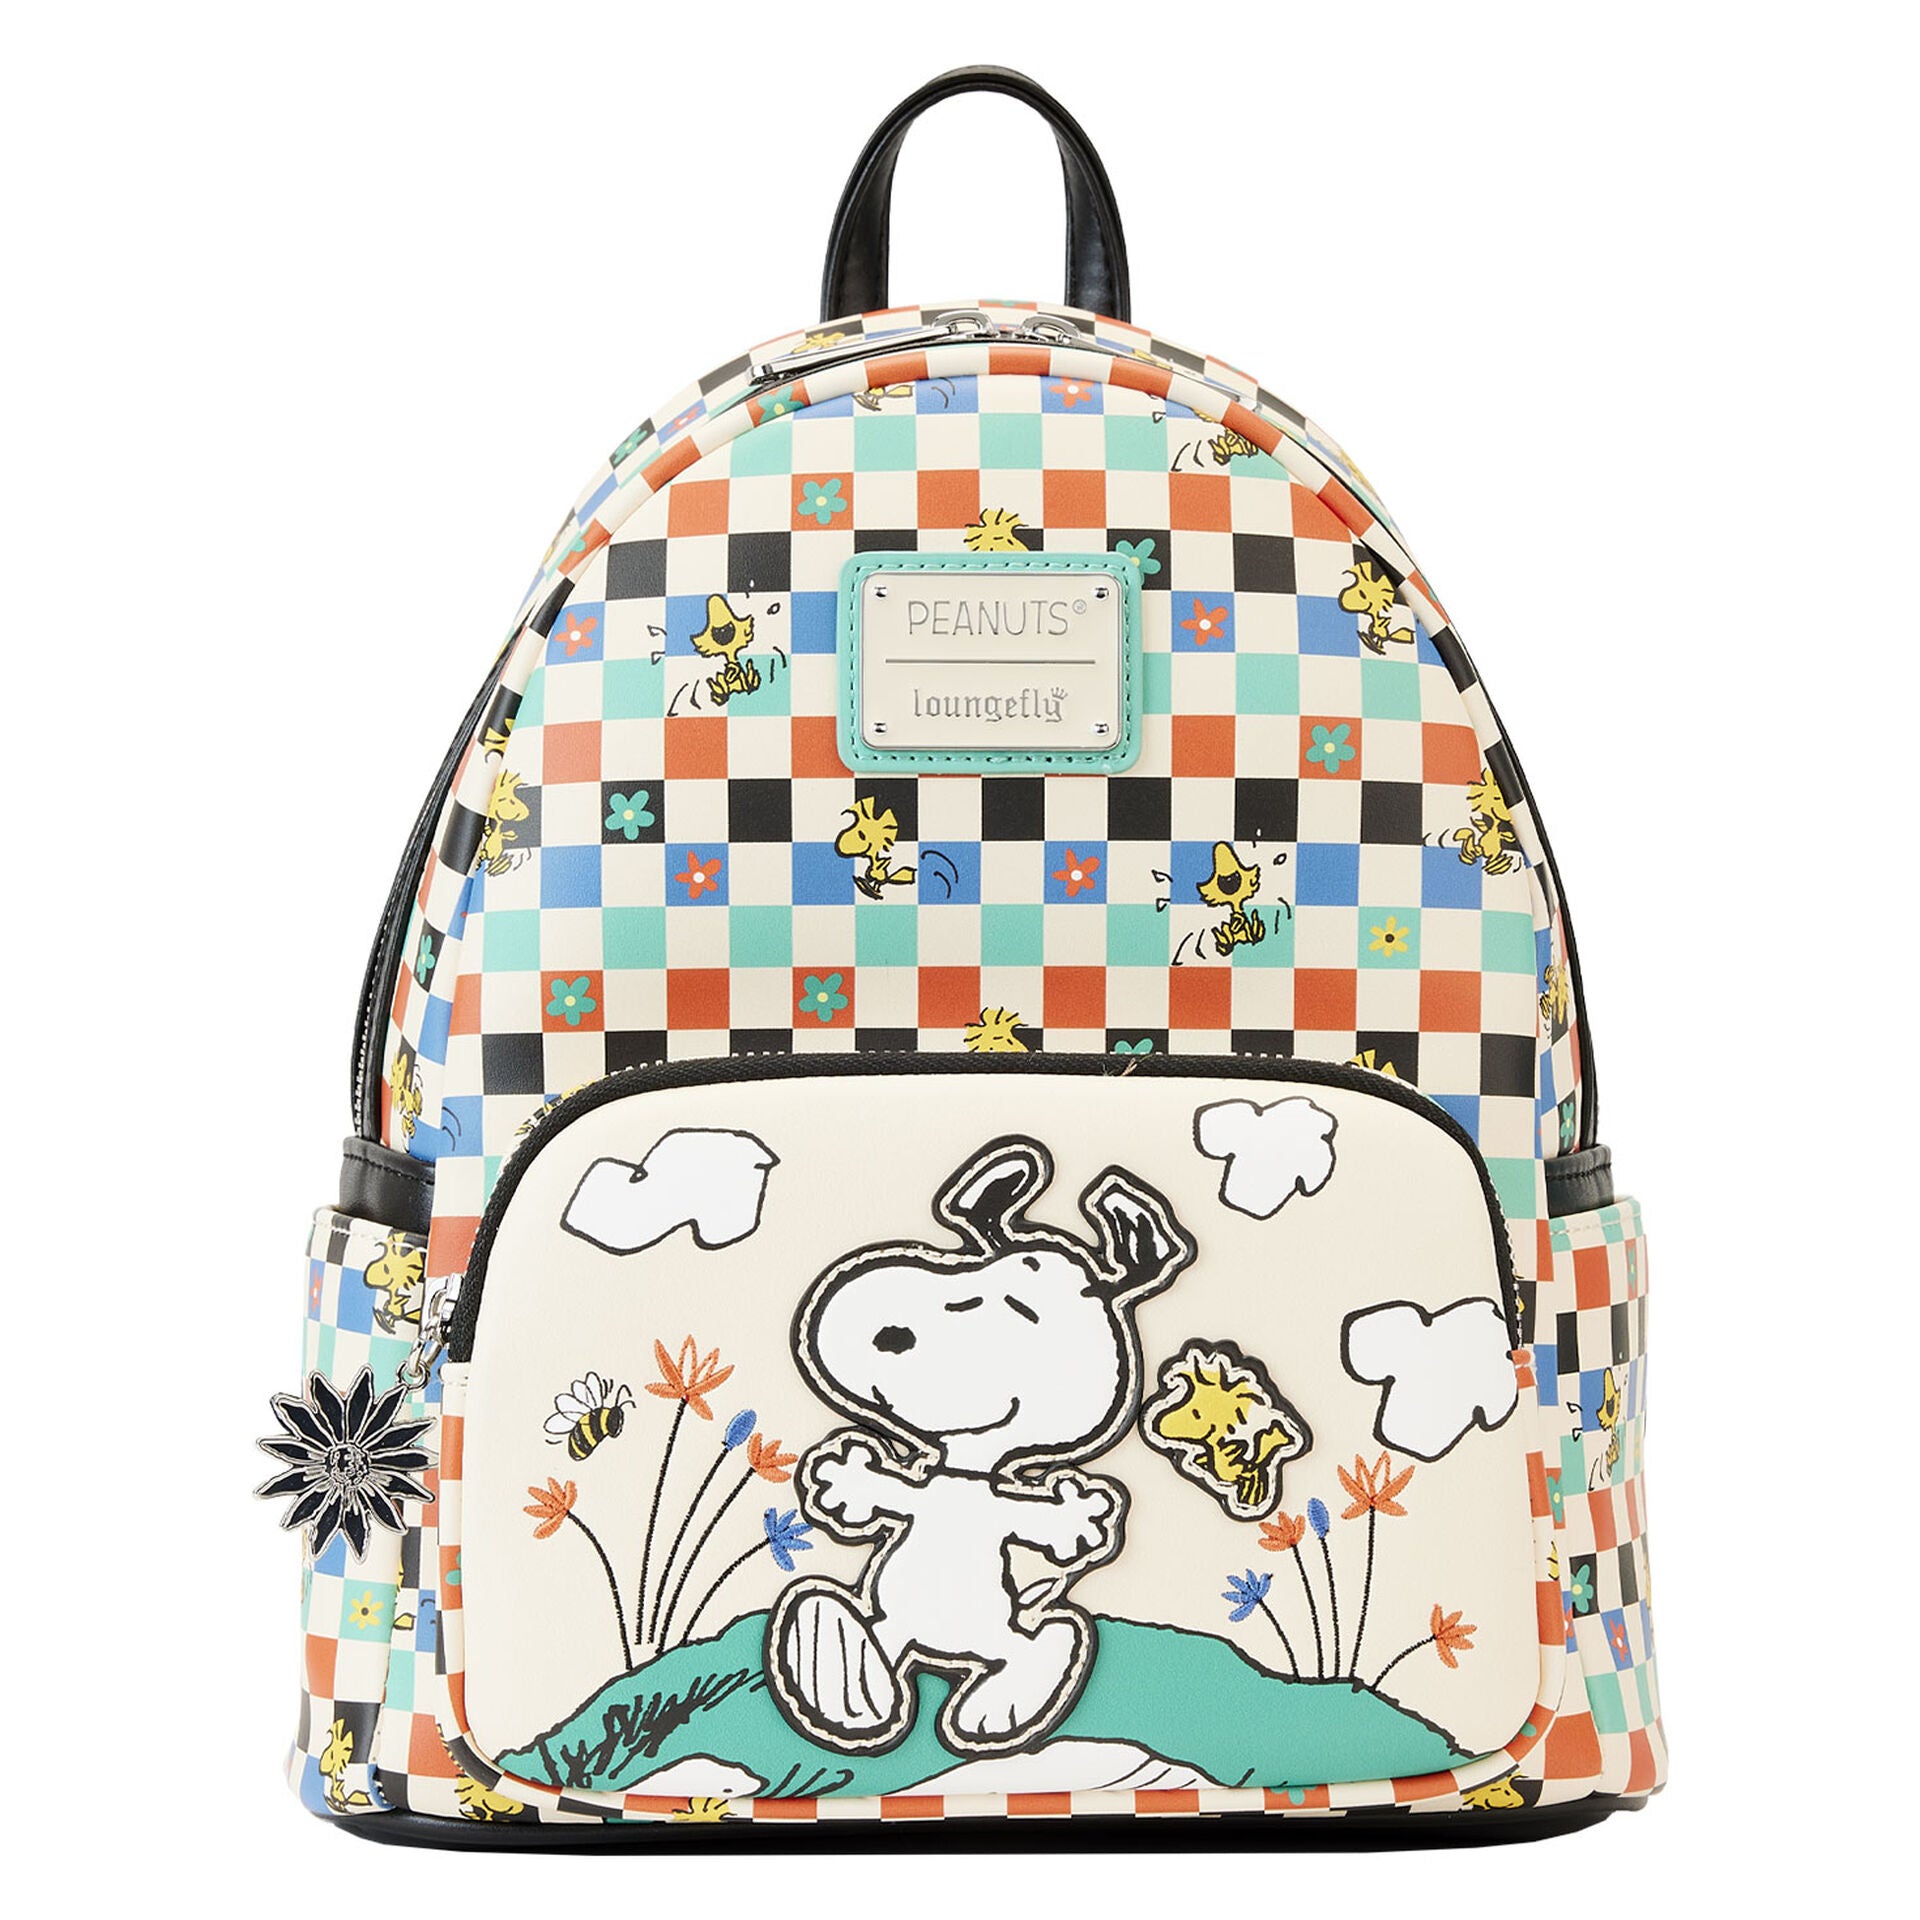 Loungefly Peanuts Snoopy and Woodstock Checkered Mini Backpack Backpack Loungefly   